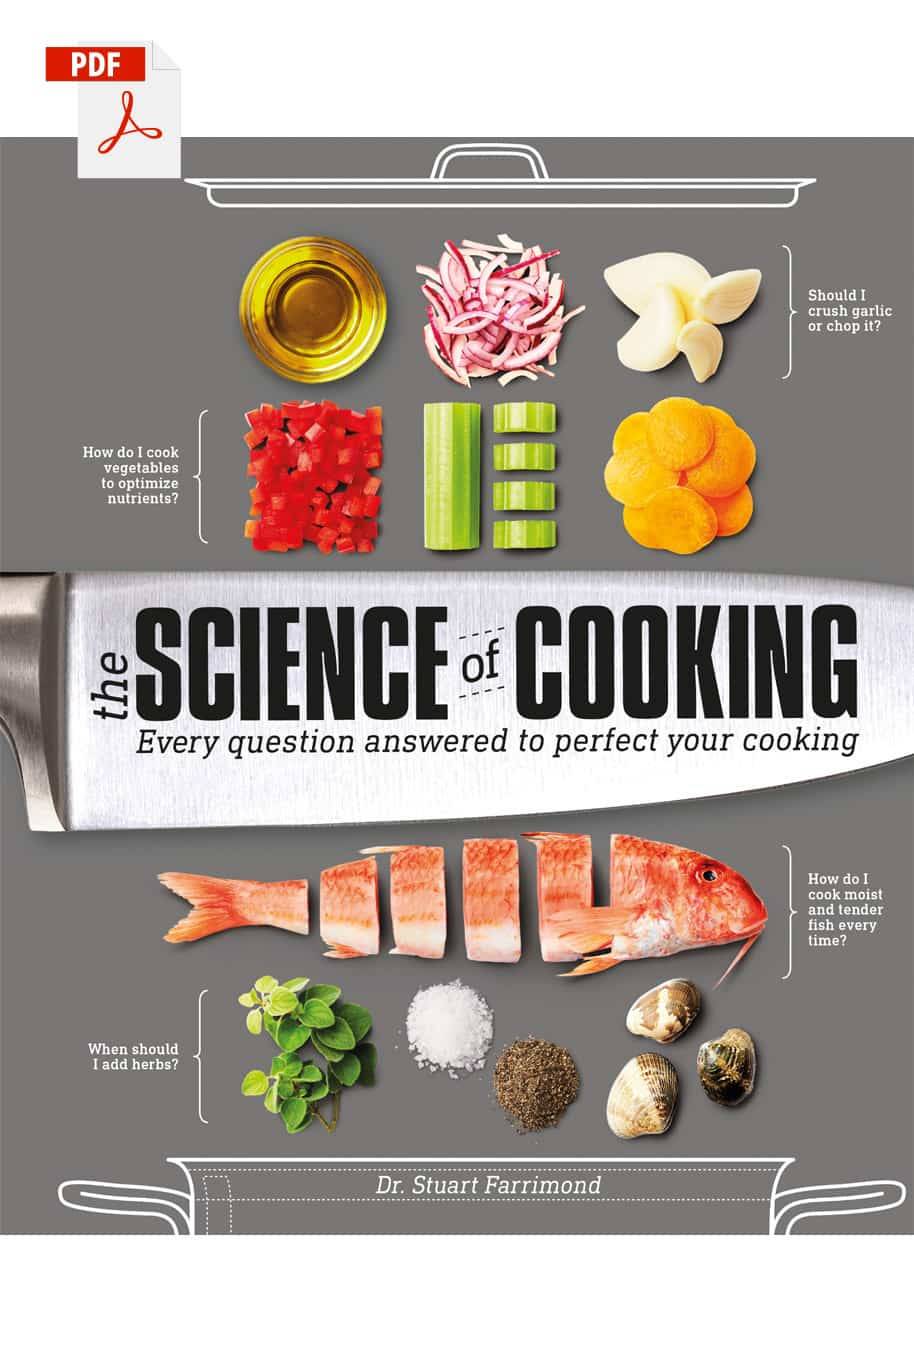 The Science of Cooking - 258 pages